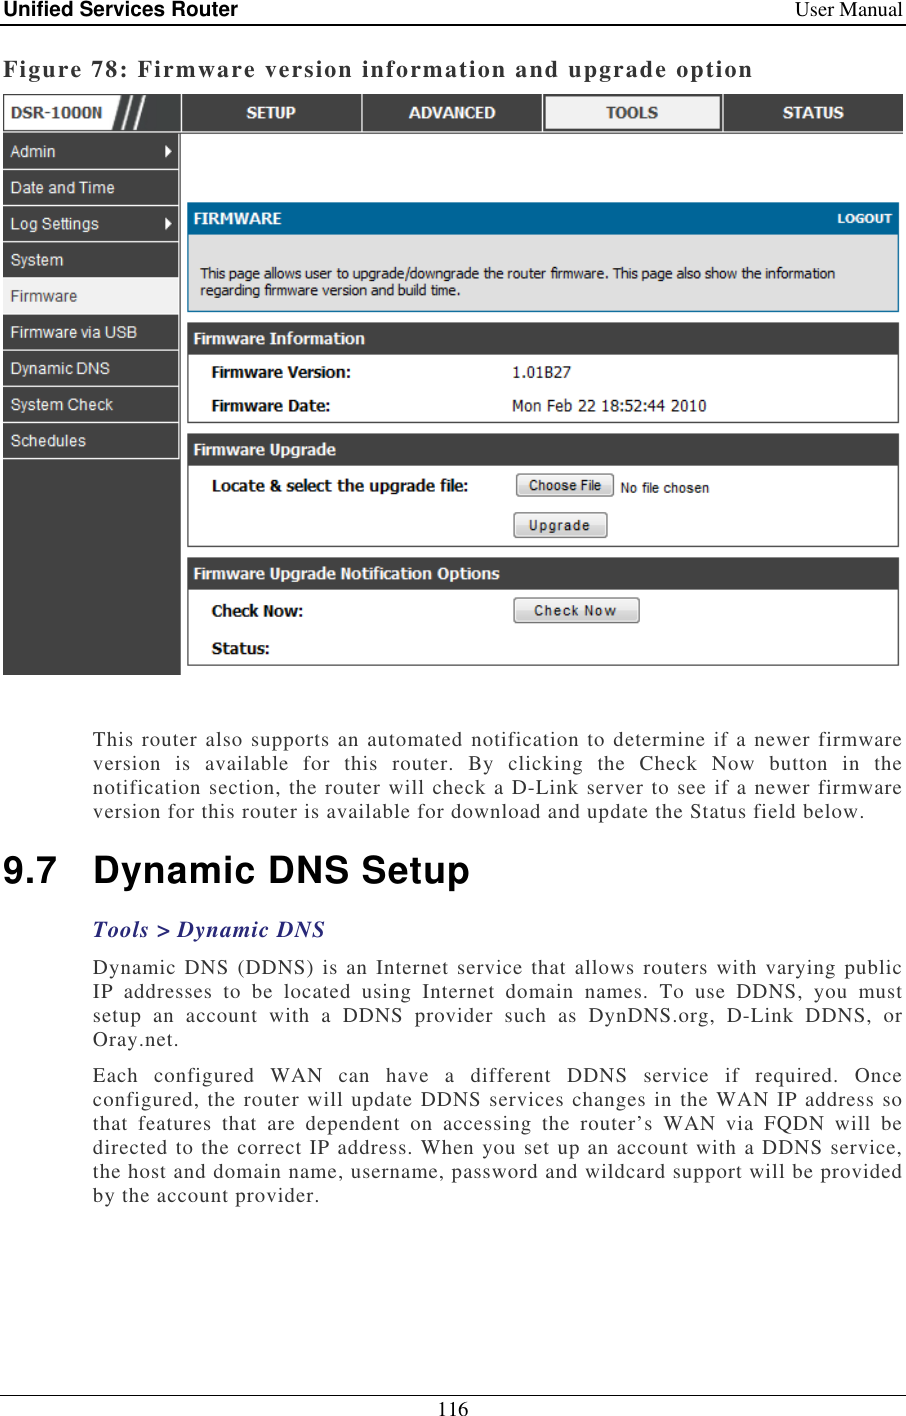 Unified Services Router    User Manual 116  Figure 78: Firmware version information and upgrade option   This router also supports an automated notification to determine if a newer firmware version  is  available  for  this  router.  By  clicking  the  Check  Now  button  in  the notification section, the router will check a D-Link server to see if a newer firmware version for this router is available for download and update the Status field below.  9.7  Dynamic DNS Setup Tools &gt; Dynamic DNS Dynamic DNS (DDNS)  is an  Internet service  that allows routers with  varying public IP  addresses  to  be  located  using  Internet  domain  names.  To  use  DDNS,  you  must setup  an  account  with  a  DDNS  provider  such  as  DynDNS.org,  D-Link  DDNS,  or Oray.net.  Each  configured  WAN  can  have  a  different  DDNS  service  if  required.  Once configured, the router will update DDNS services changes in the WAN IP address so that  features  that  are  dependent  on  accessing  the  router’s  WAN  via  FQDN  will  be directed to the correct IP address. When you set up an account with a DDNS service, the host and domain name, username, password and wildcard support will be provided by the account provider.  